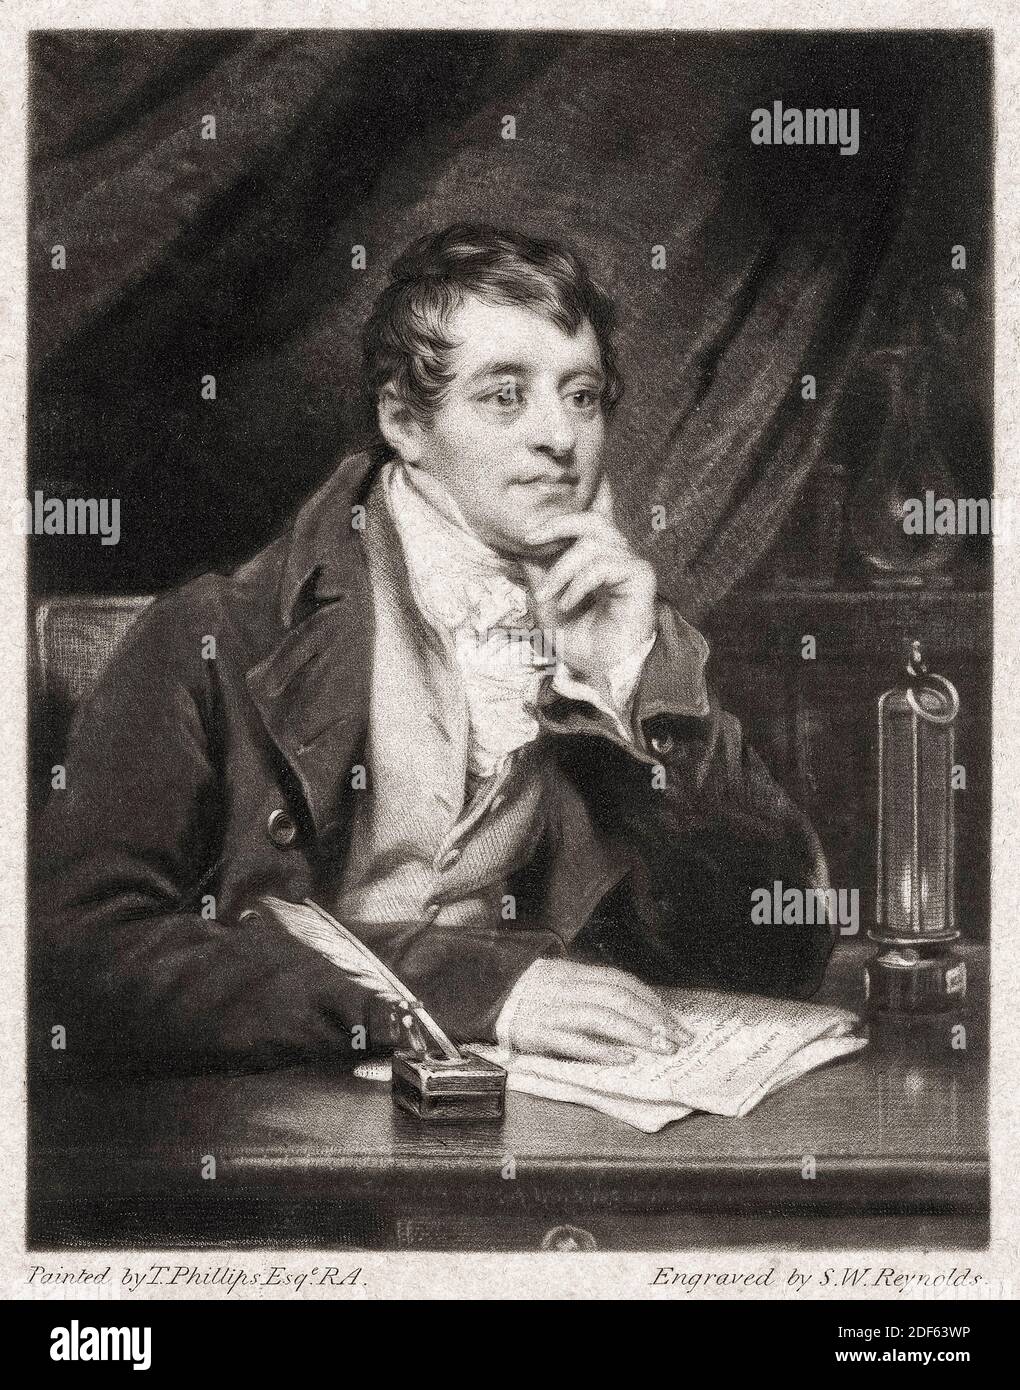 Sir Humphry Davy, 1st Baronet (1778-1829), Cornish chemist and inventor, portrait engraving by SW Reynolds after Thomas Phillips, after 1821 Stock Photo